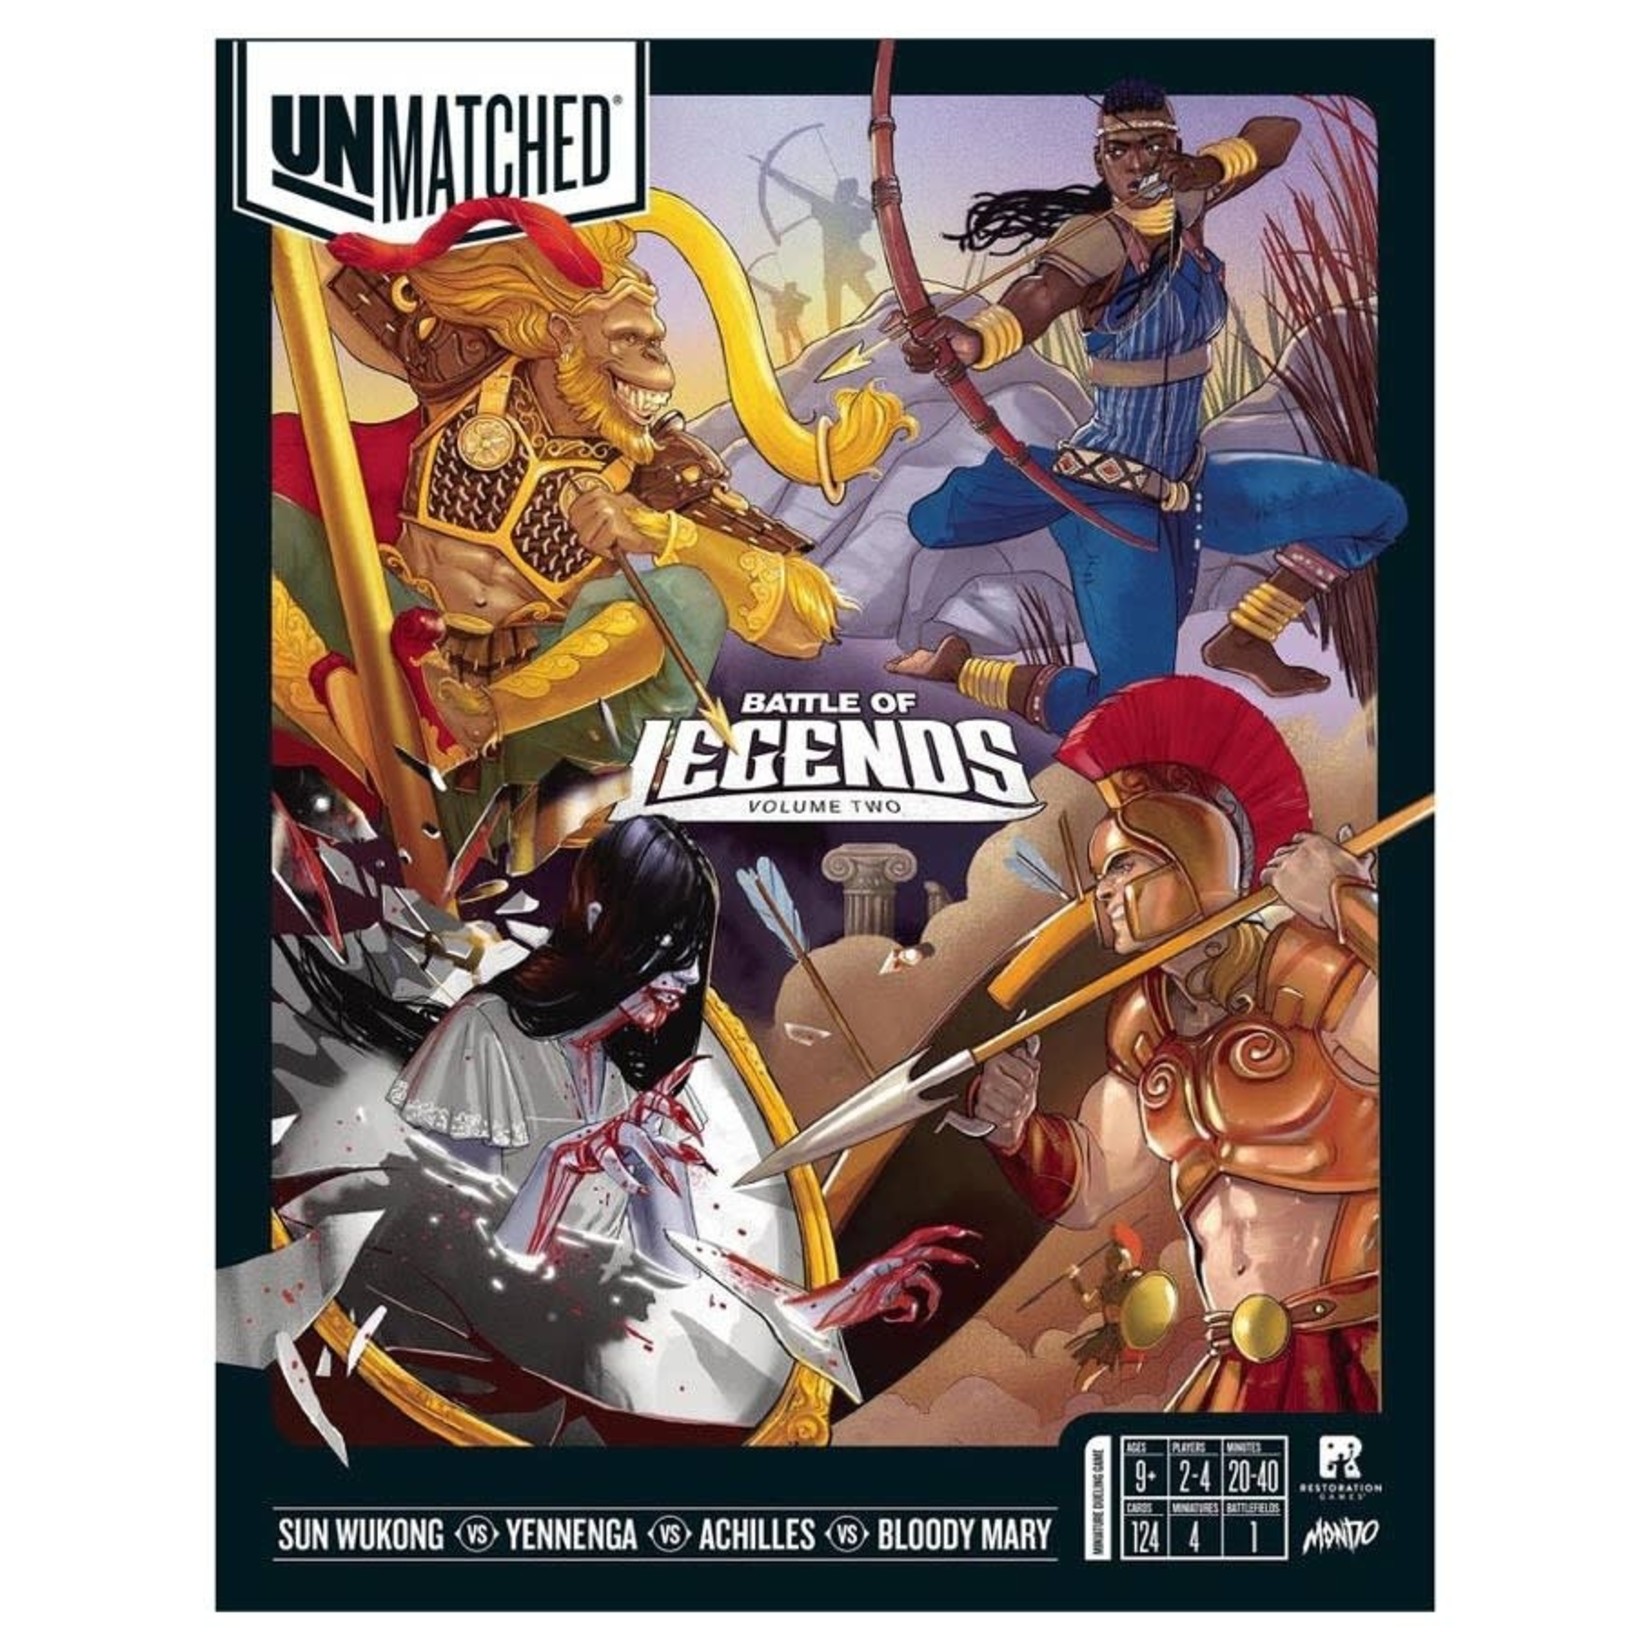 restoration games Unmatched: Battle of Legends Vol. 2 - Yennenga, Achilles, Sun Wukong, and Bloody Mary